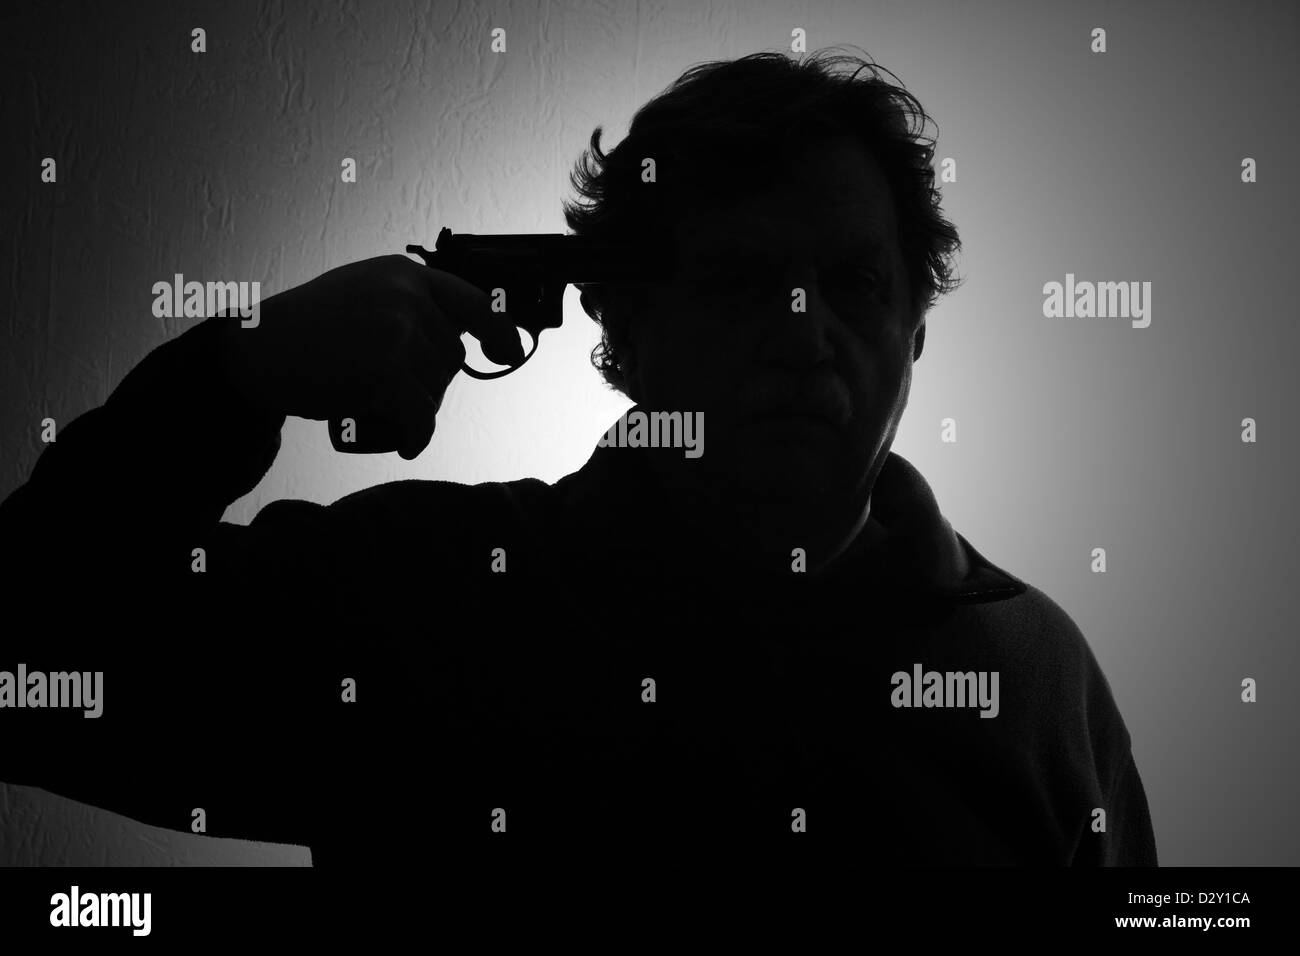 suicide, a man put a gun to his head, black and white Stock Photo